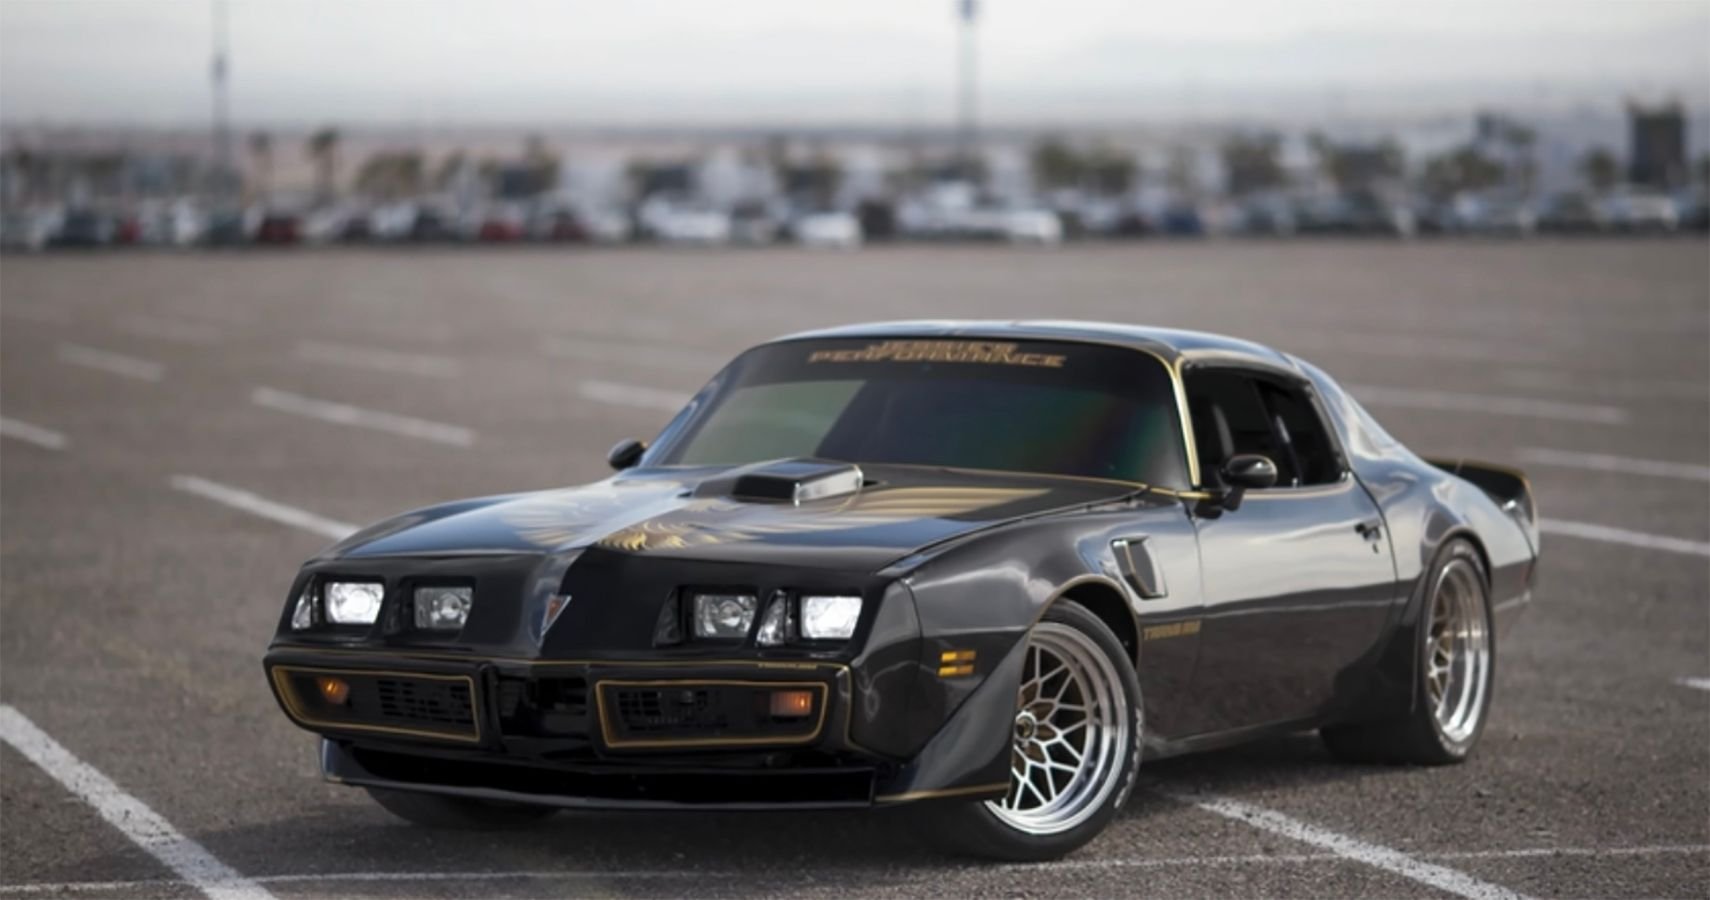 This Twin-Turbo Trans Am Restomod Would Leave Bandit Speechless